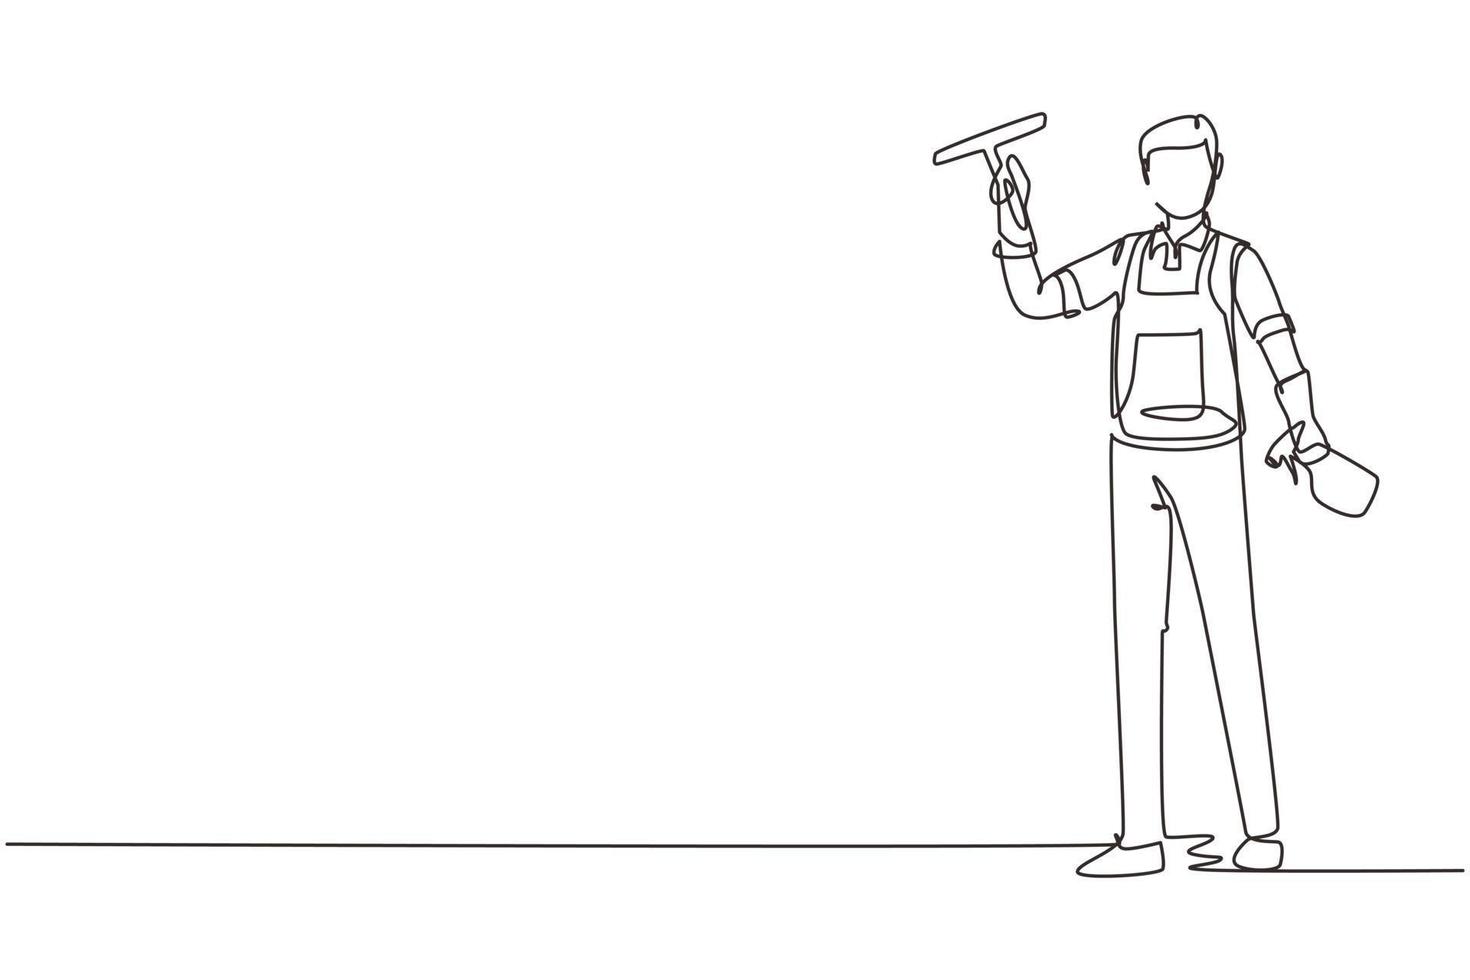 Single one line drawing smiling cleaning staff member is wiping the window with brush and spray. Concept of man cleaning windows from dust in different premises. Continuous line draw design vector